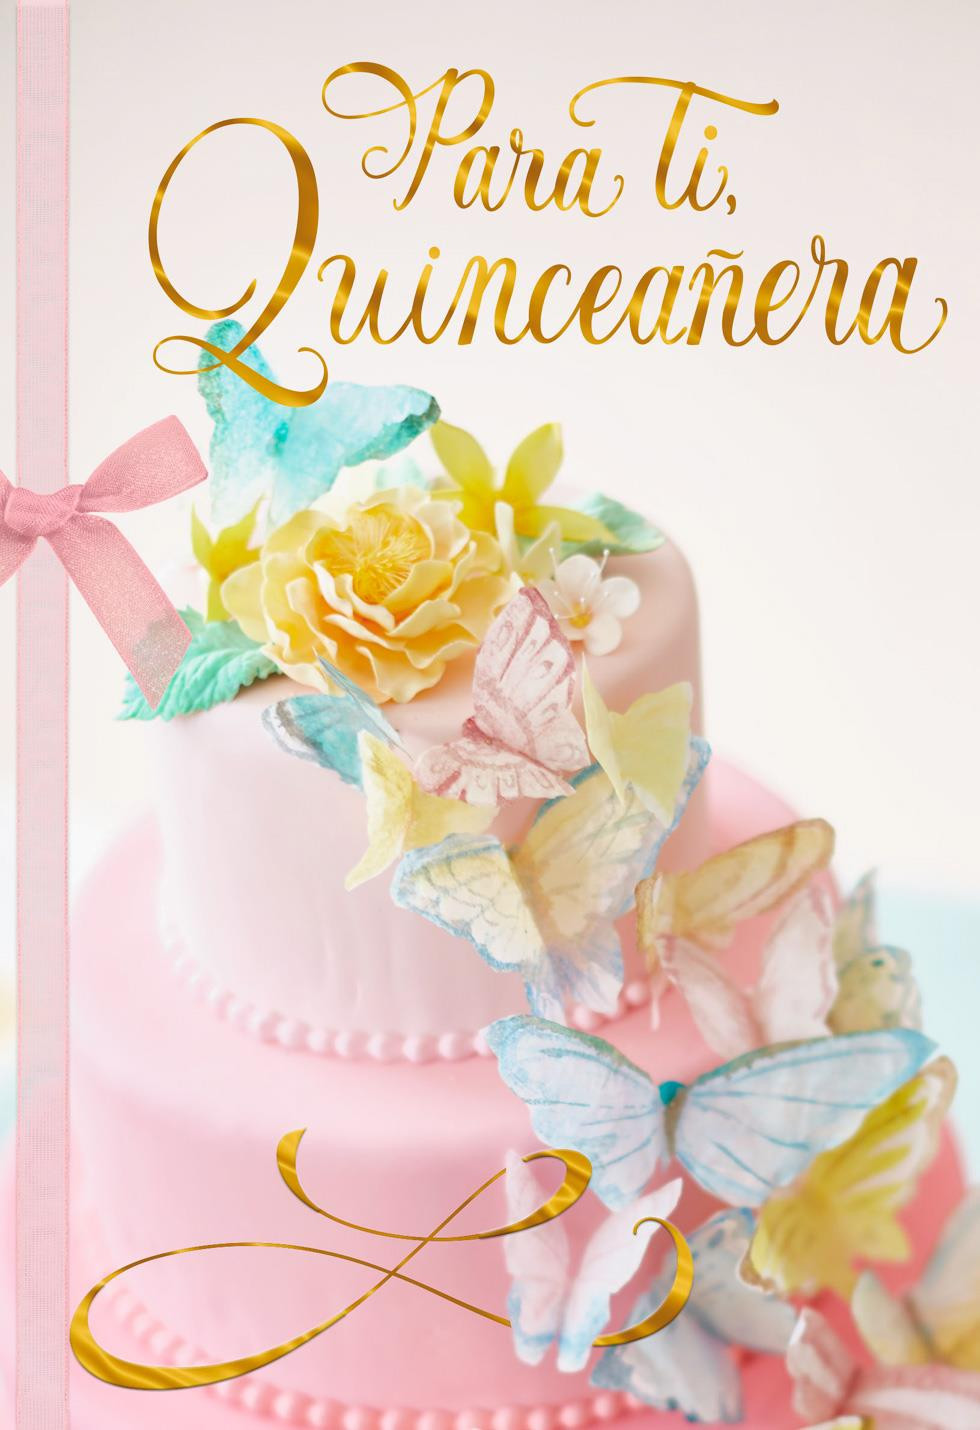 Quinceanera Birthday Wishes
 Butterfly Cake Spanish Language Quinceañera Card